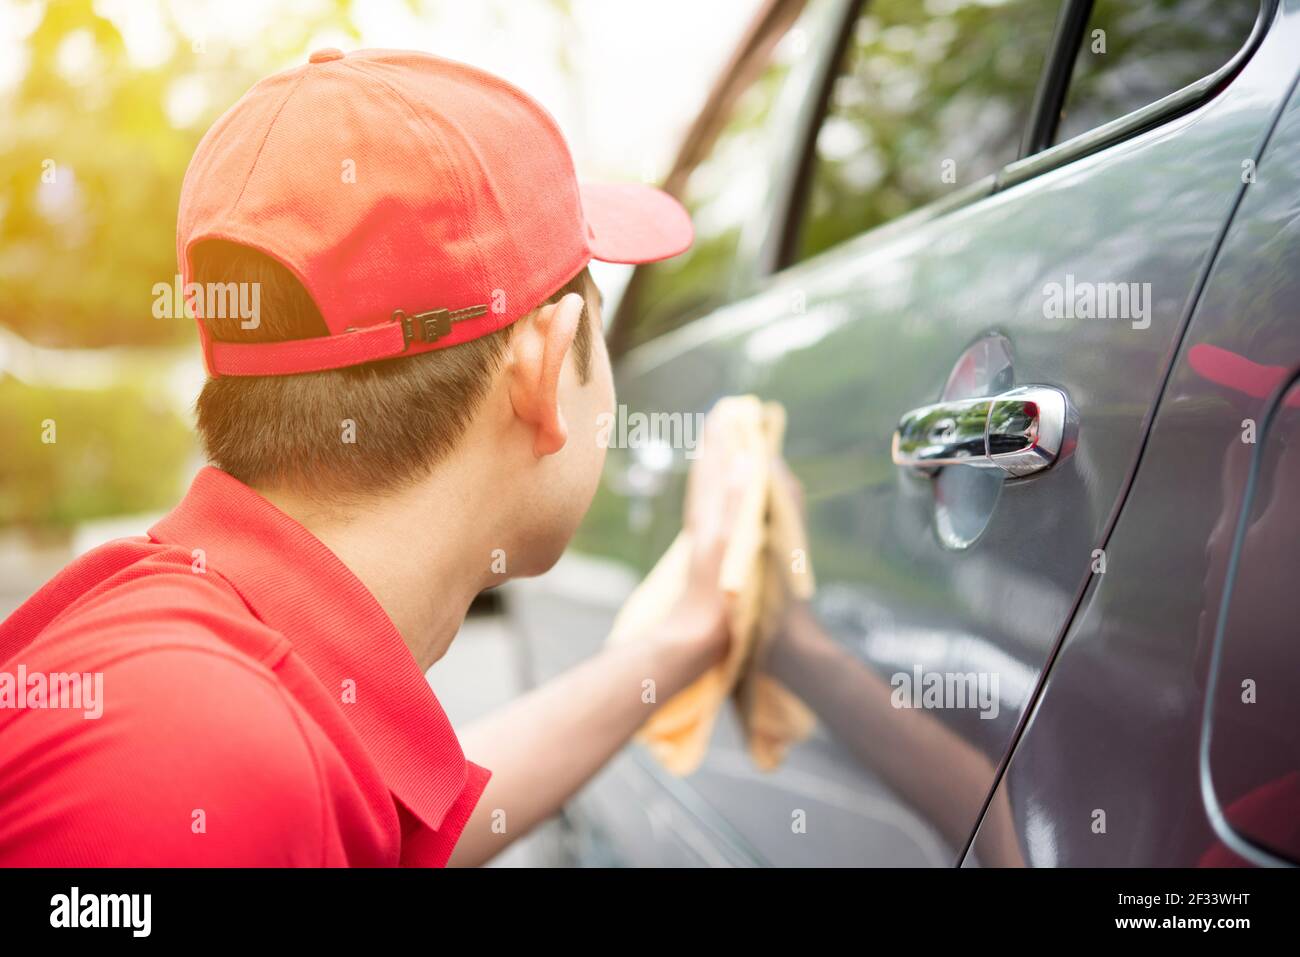 A man in red uniform cleaning car   - auto cleaning service concept Stock Photo